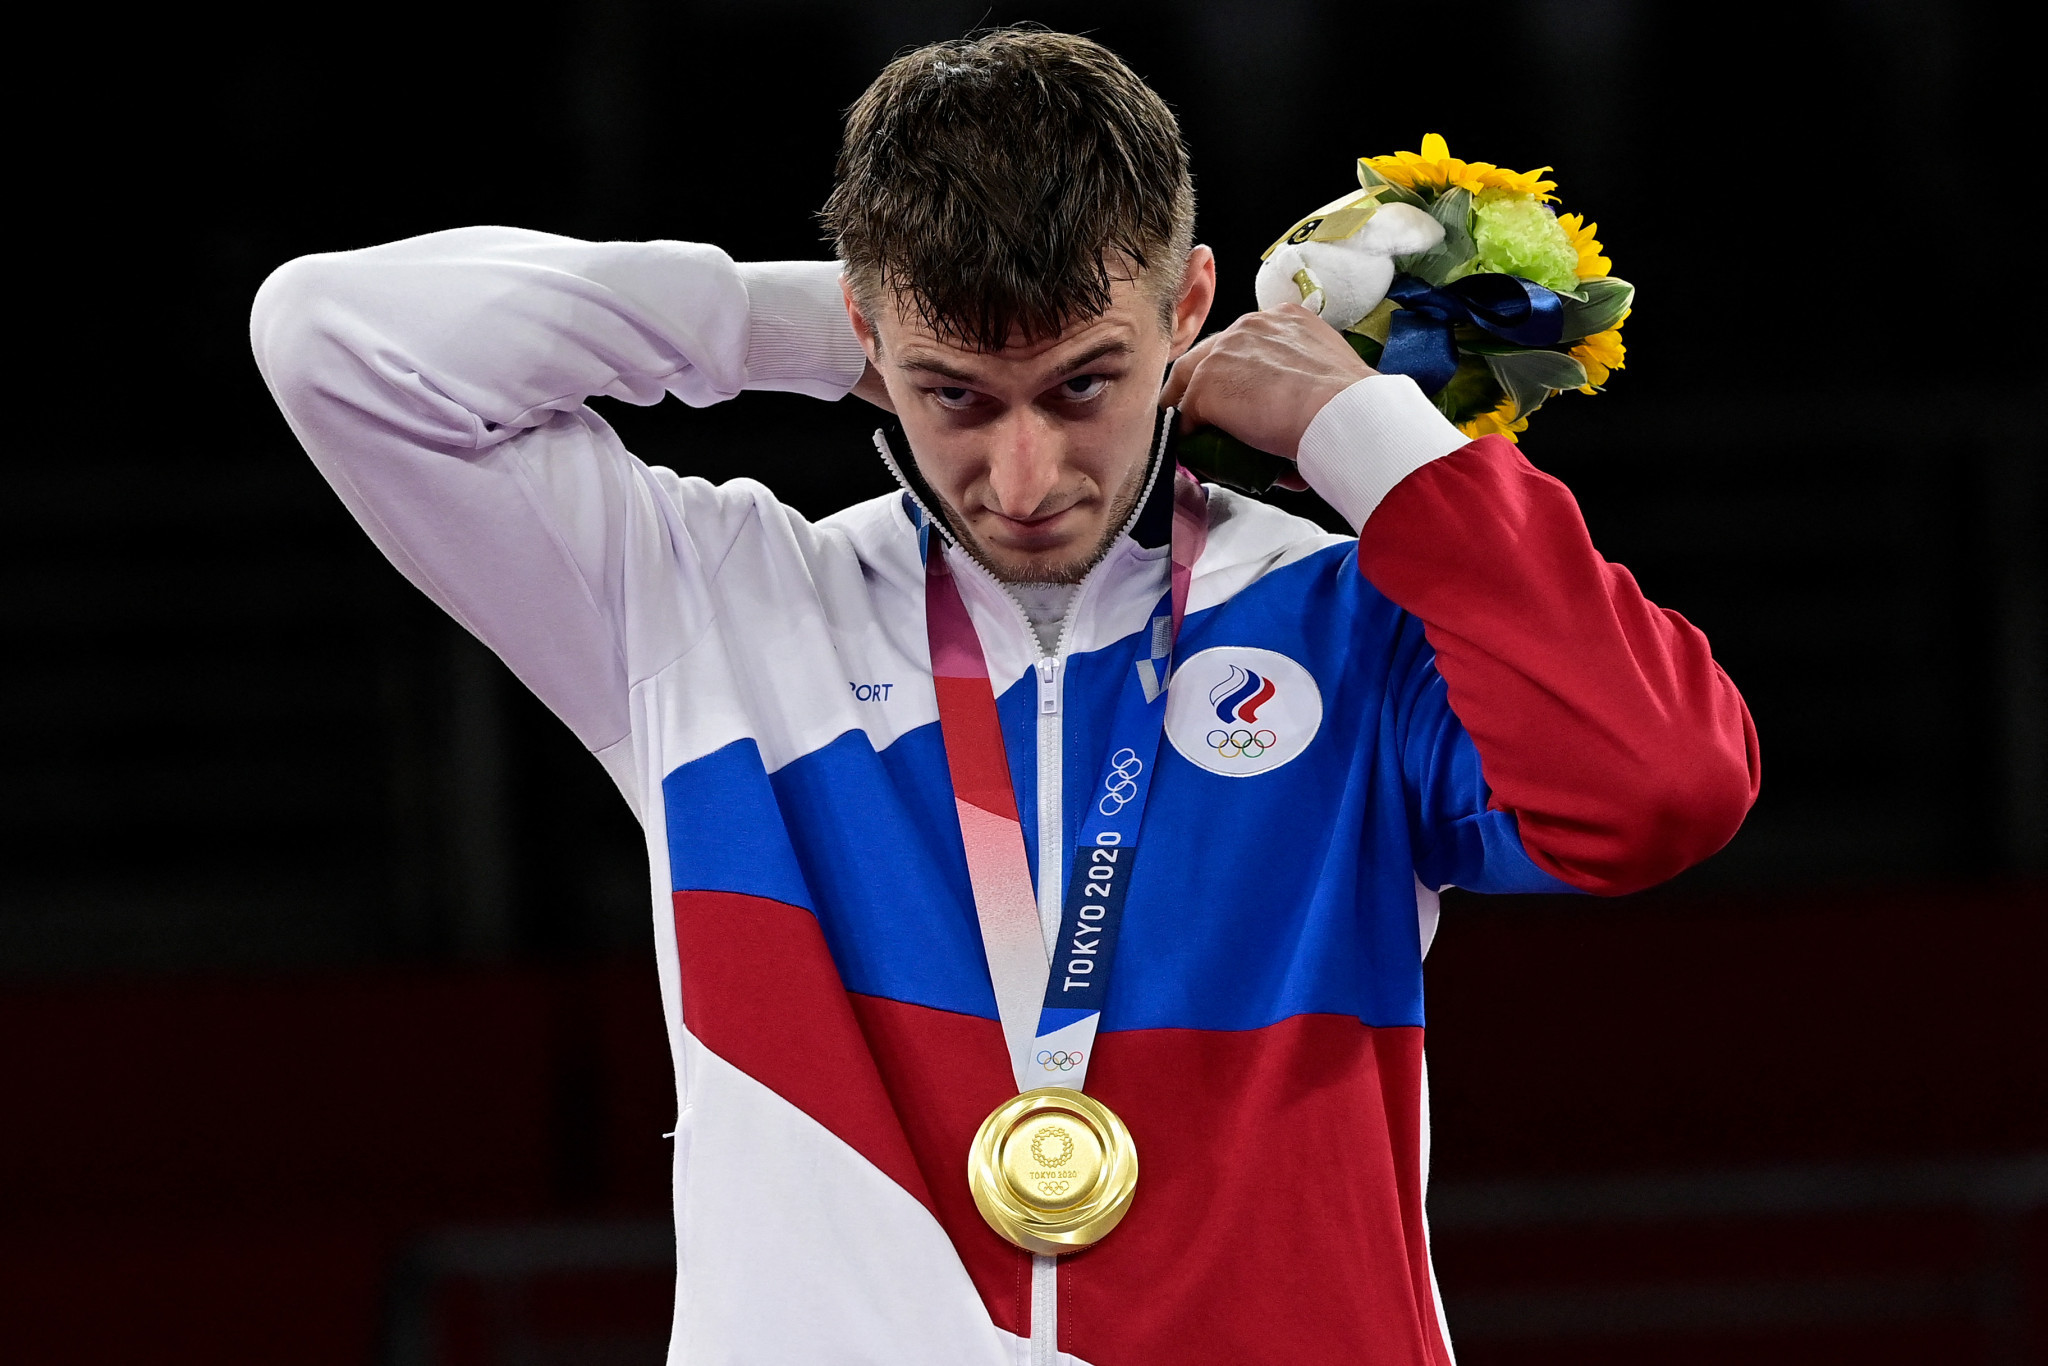 Vladislav Larin won gold for the Russian Olympic Committee in taekwondo ©Getty Images